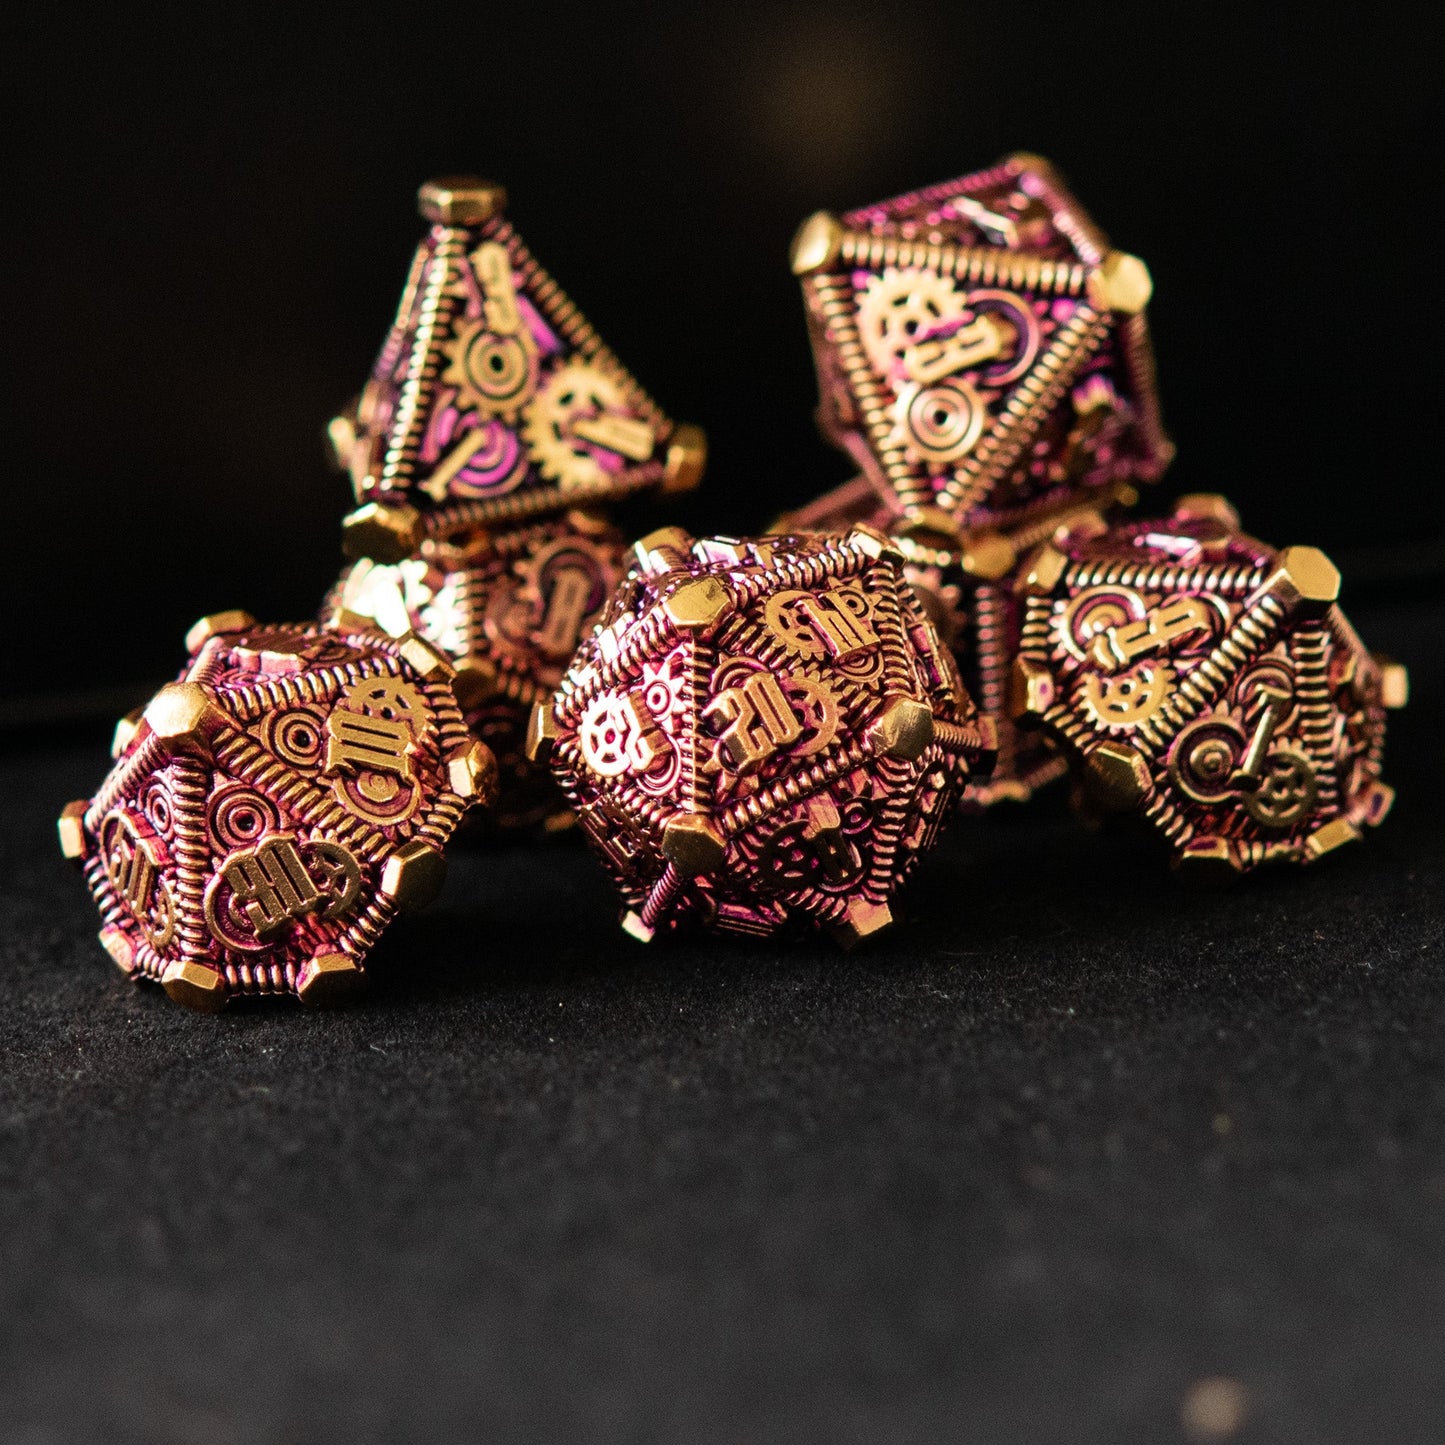 Purple and Gold - Weird West Wasteland Metal Dice Set